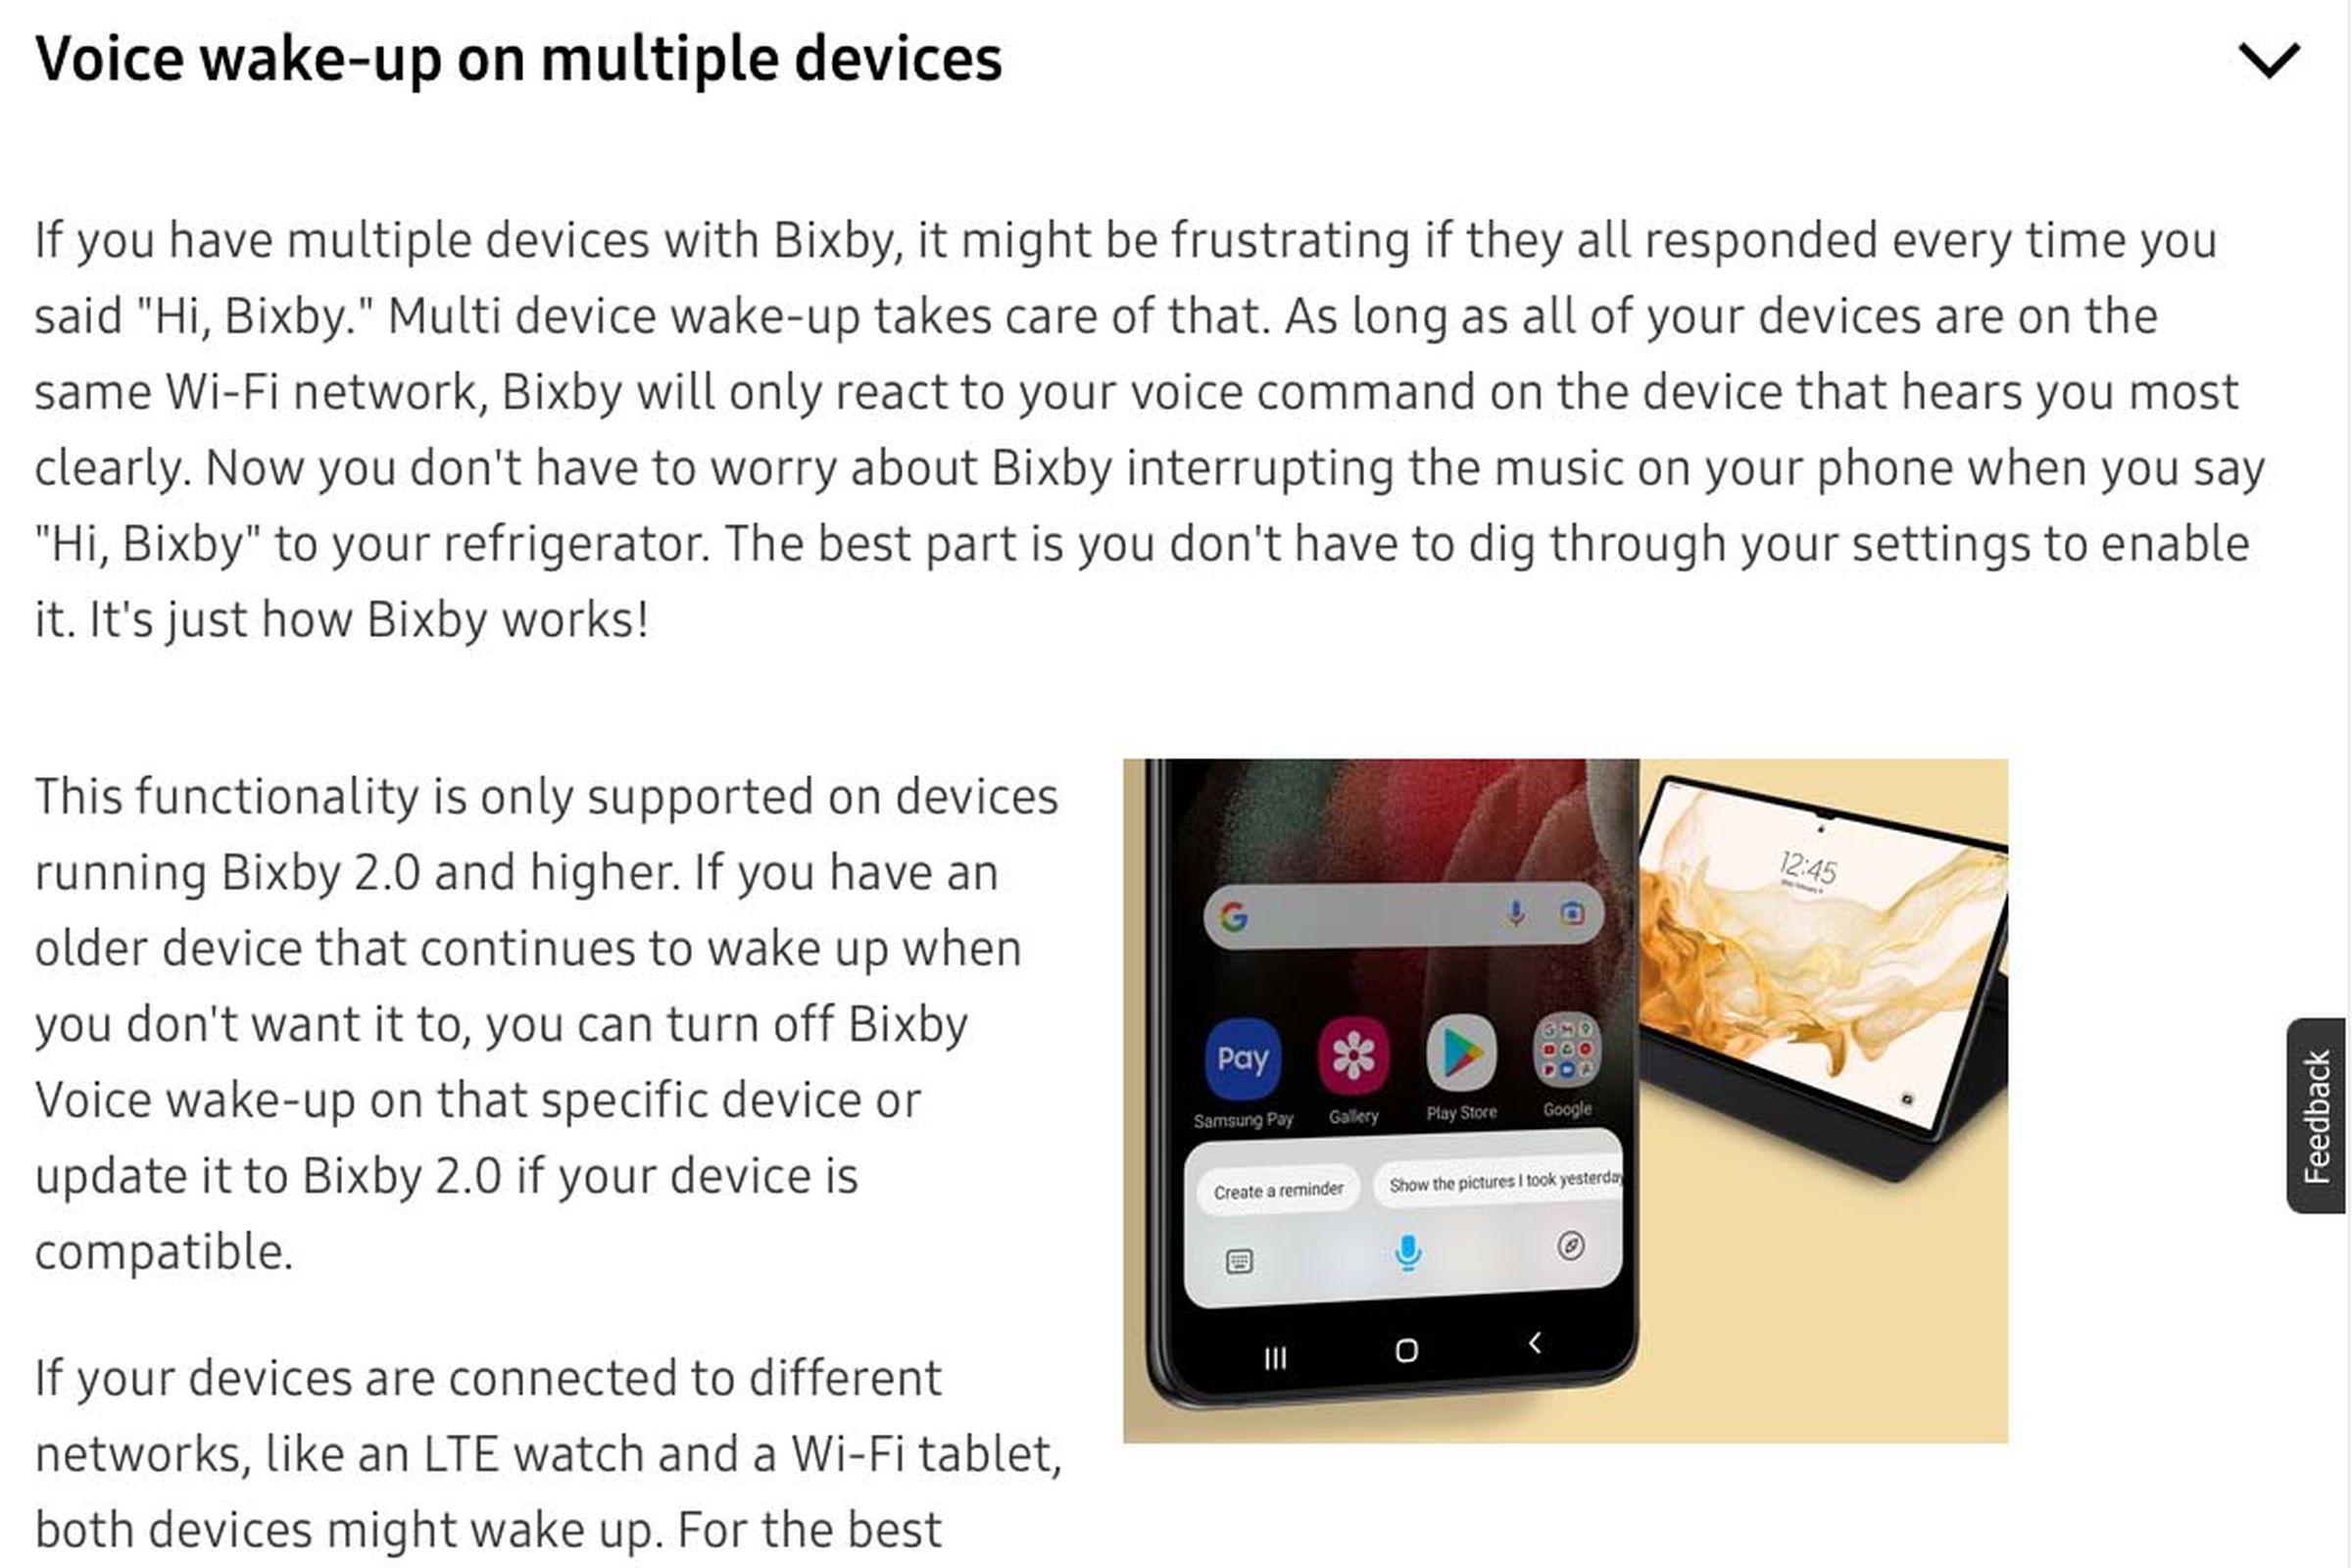 A screenshot of the image on Samsung’s support page.